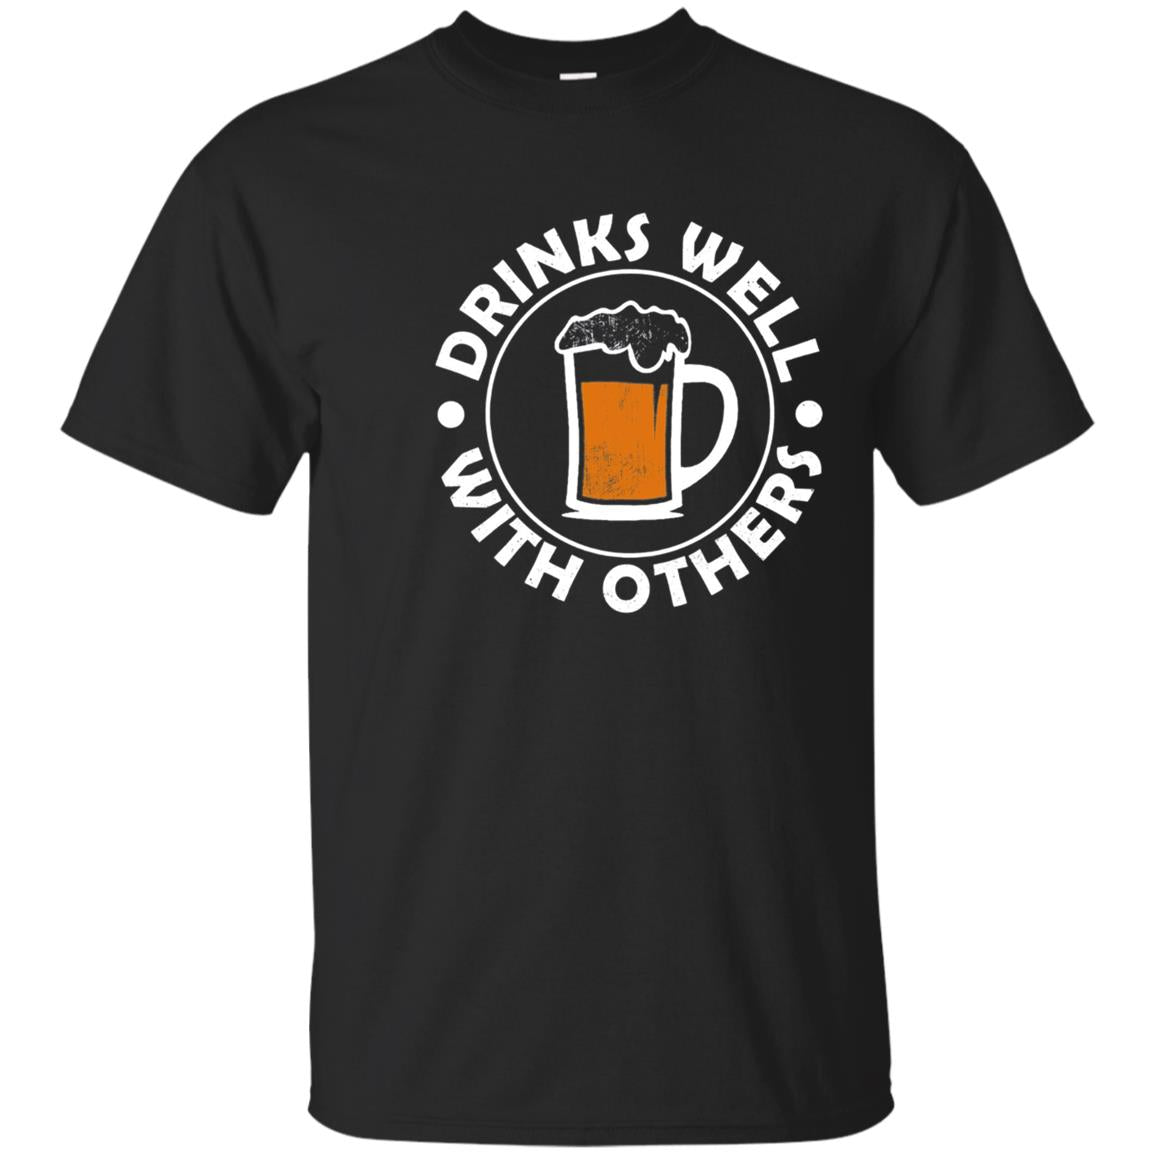 Drinks Well With Others Funny Beer Drinking Party T-shirt